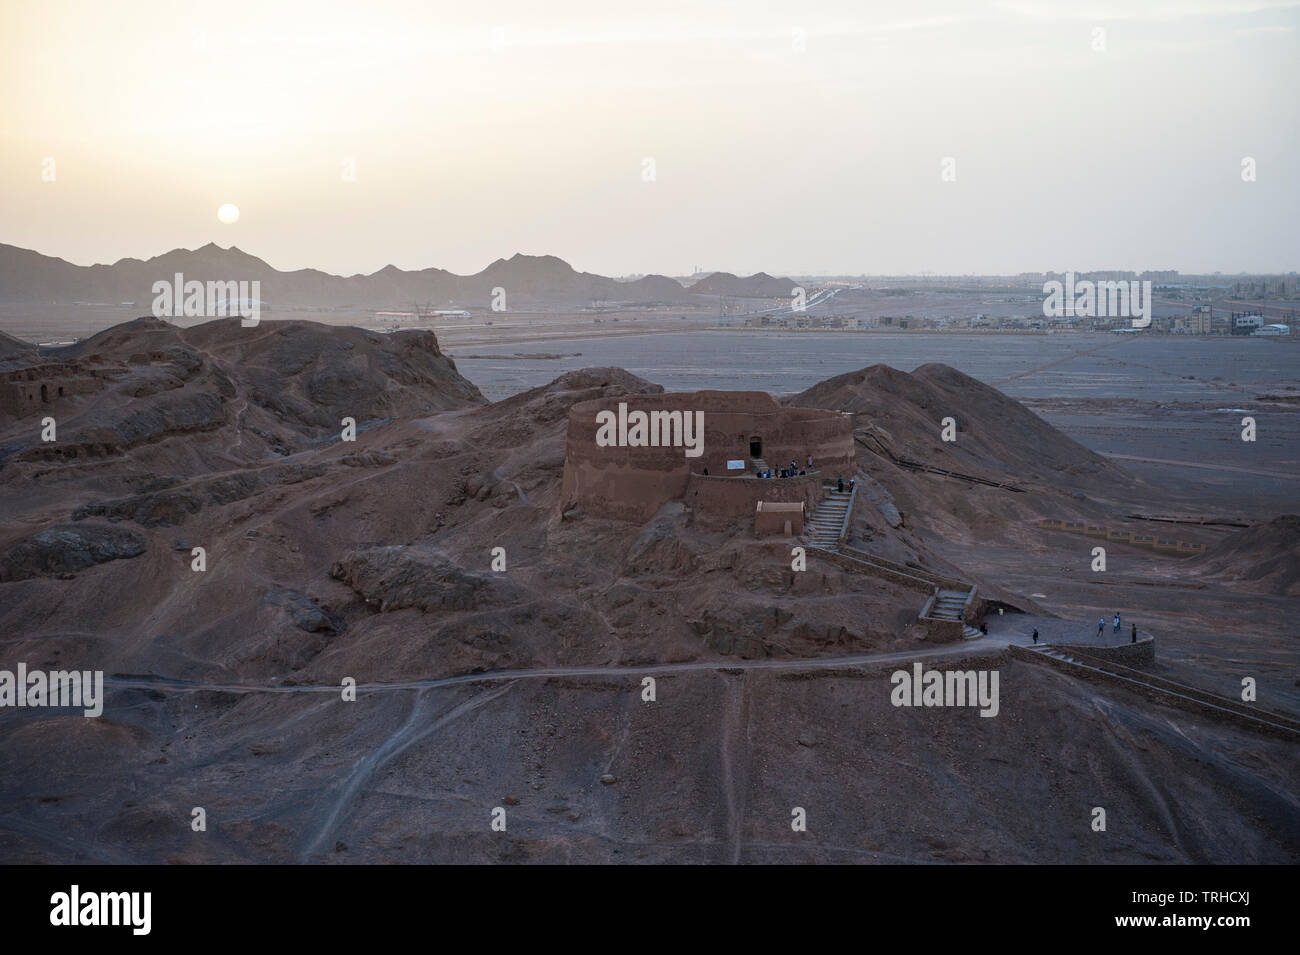 One of the two Towers of Silence, traditional Zoroastrian burial circles where bodies were left to be eaten by scavenger birds, outside of Yazd, Iran. Stock Photo